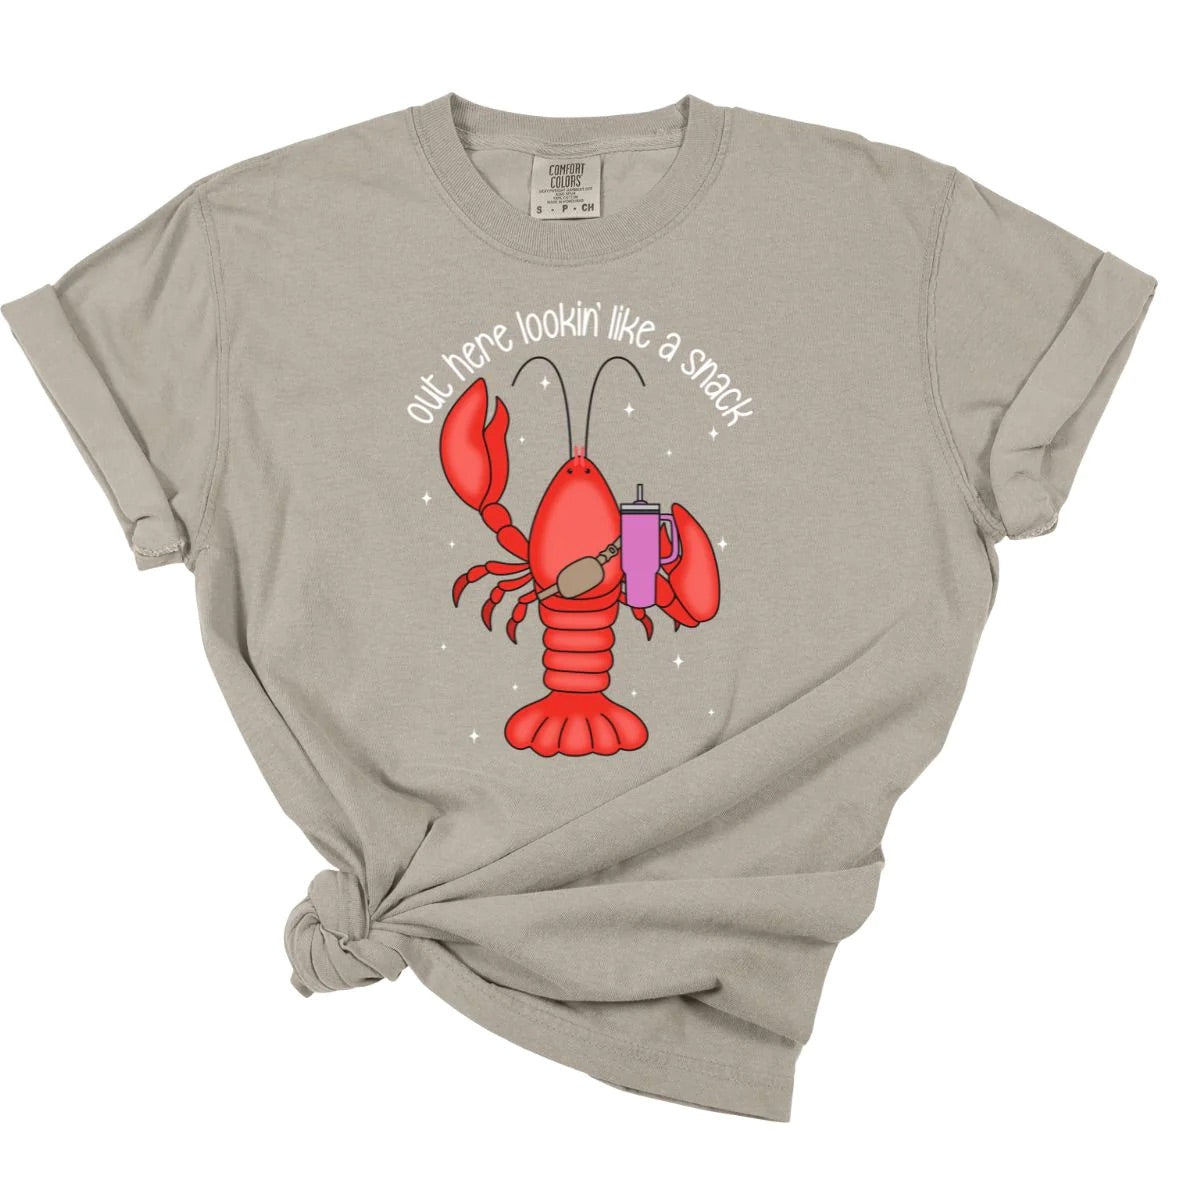 Lobster Lookin' Like A Snack Tee *MADE TO ORDER*